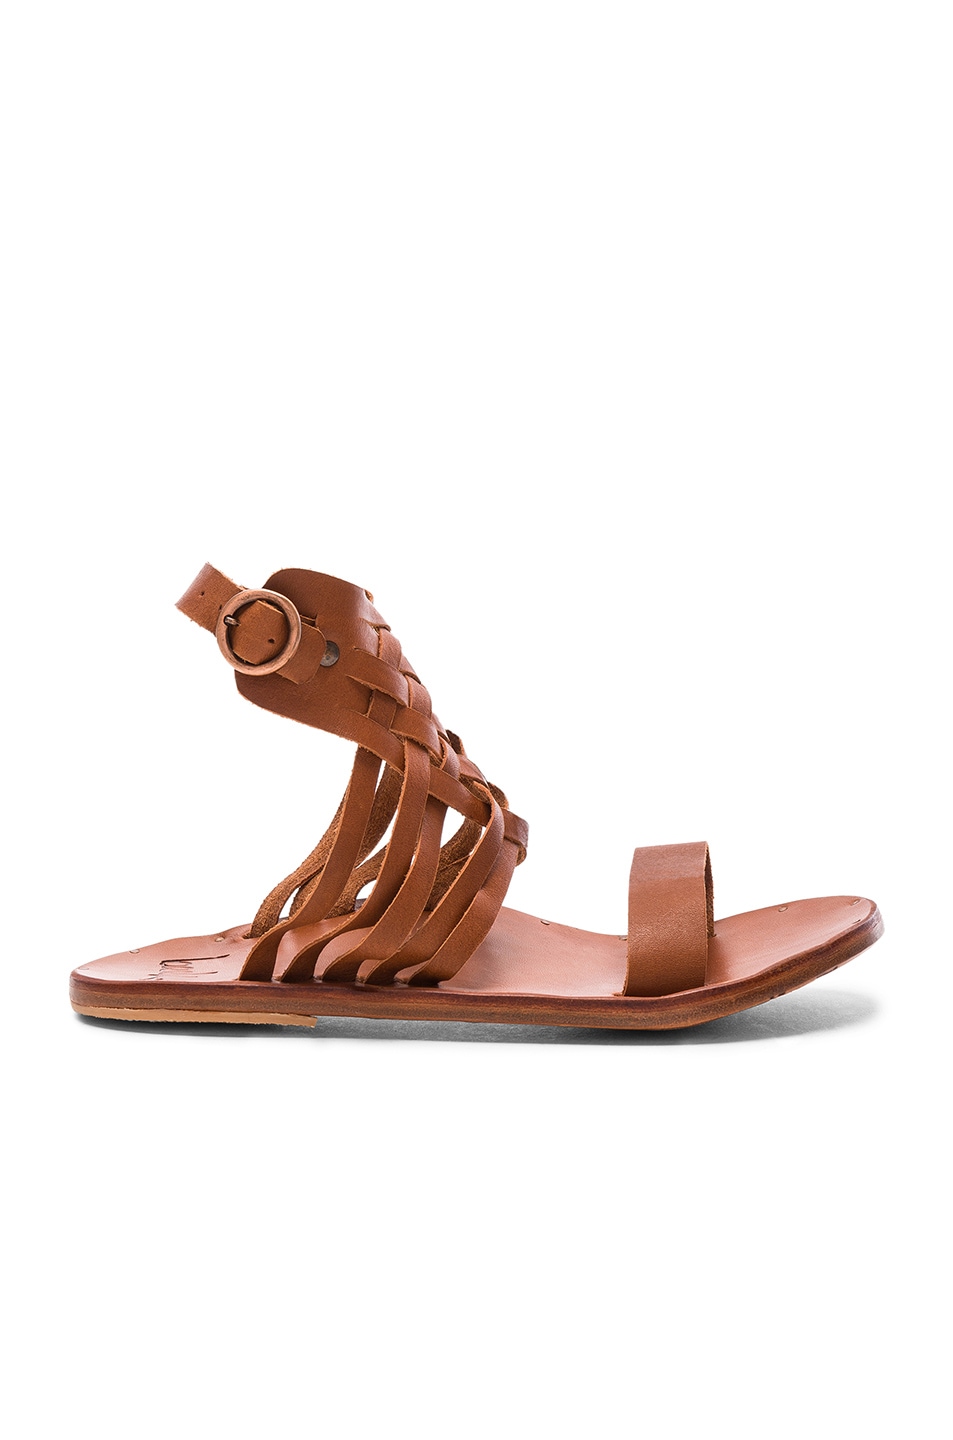 Image 1 of Beek The Raven Sandals in Tan